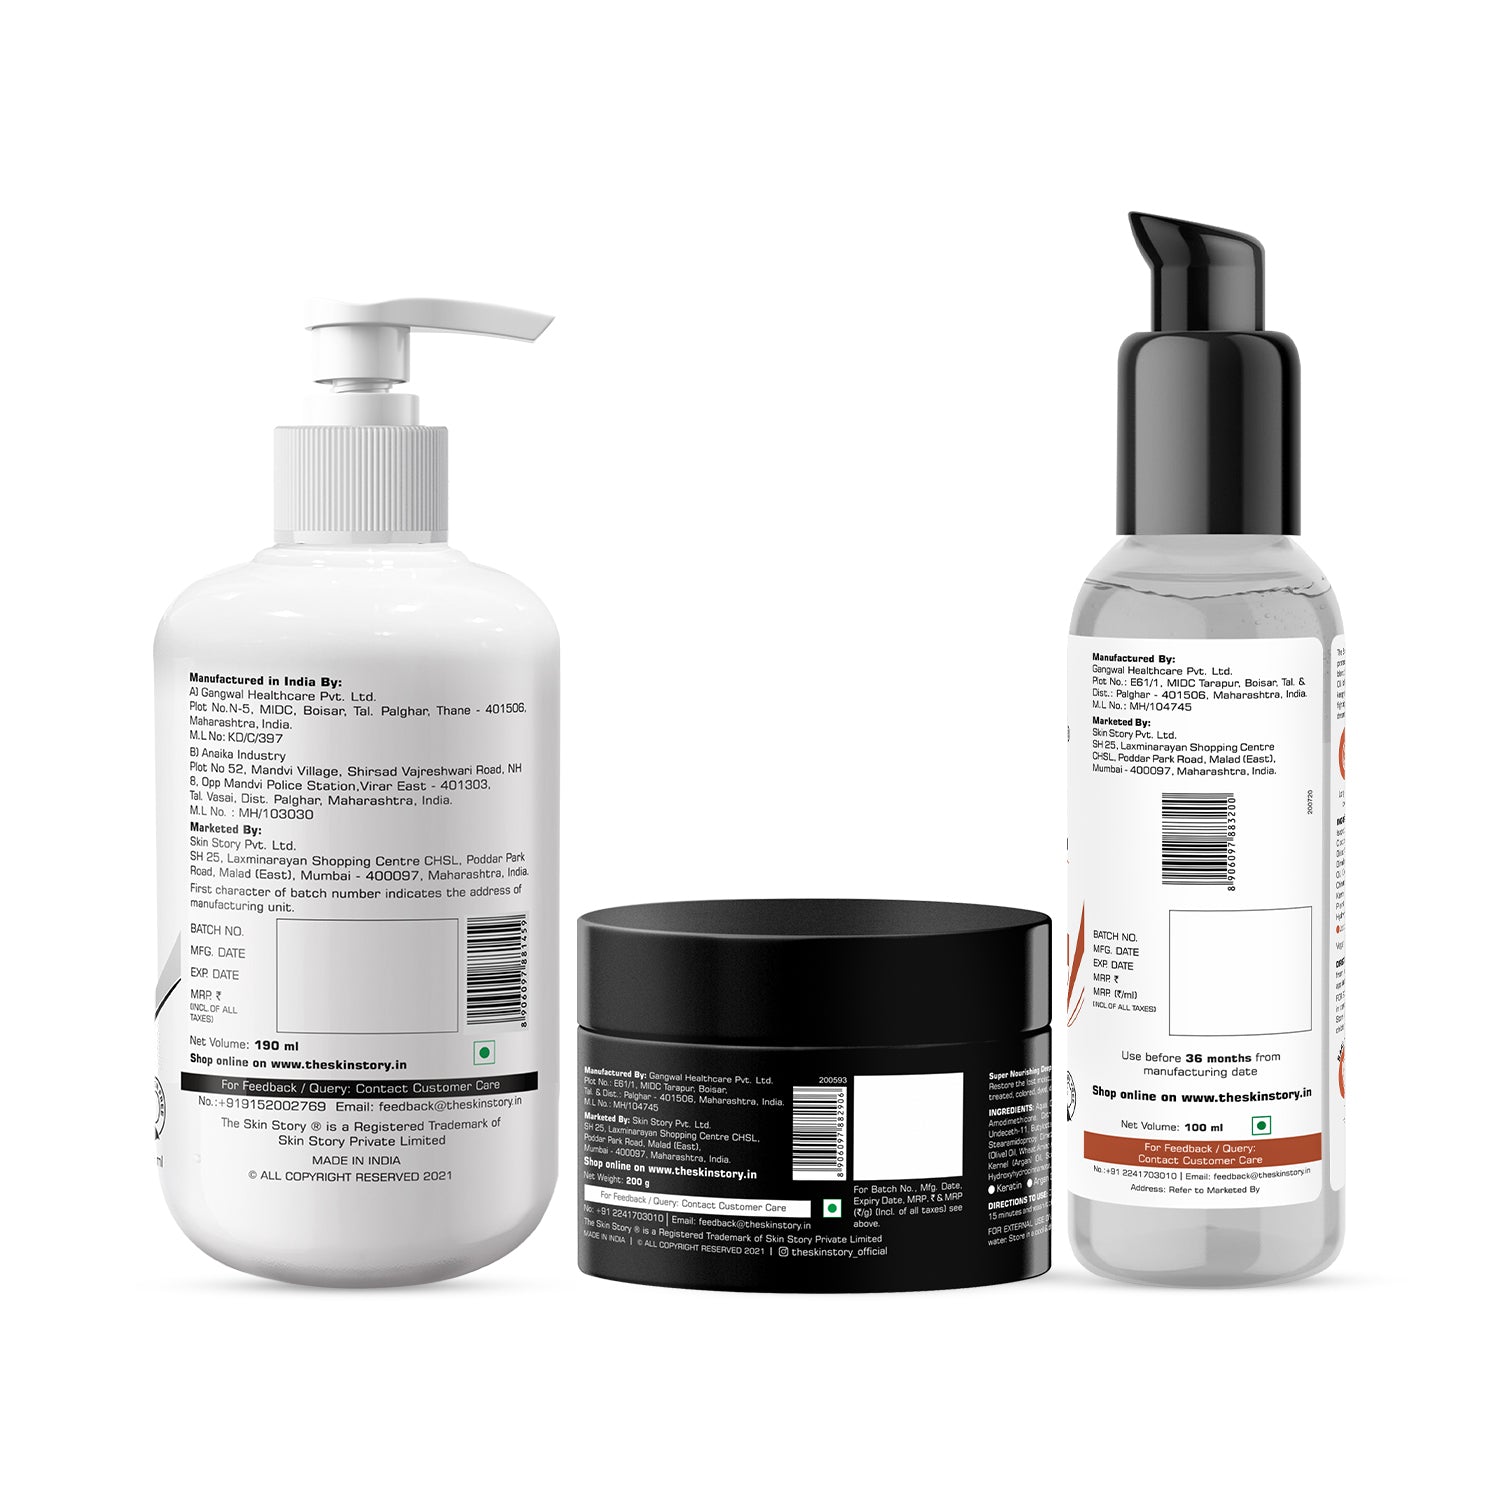 THe Skin Story Damage Repair Ser (CTP) (The Skin Story Sulphate Free Shampoo, 190ml The Skin Story Hair Mask, 200g The Skin Story Color Protection Serum, 100ml)